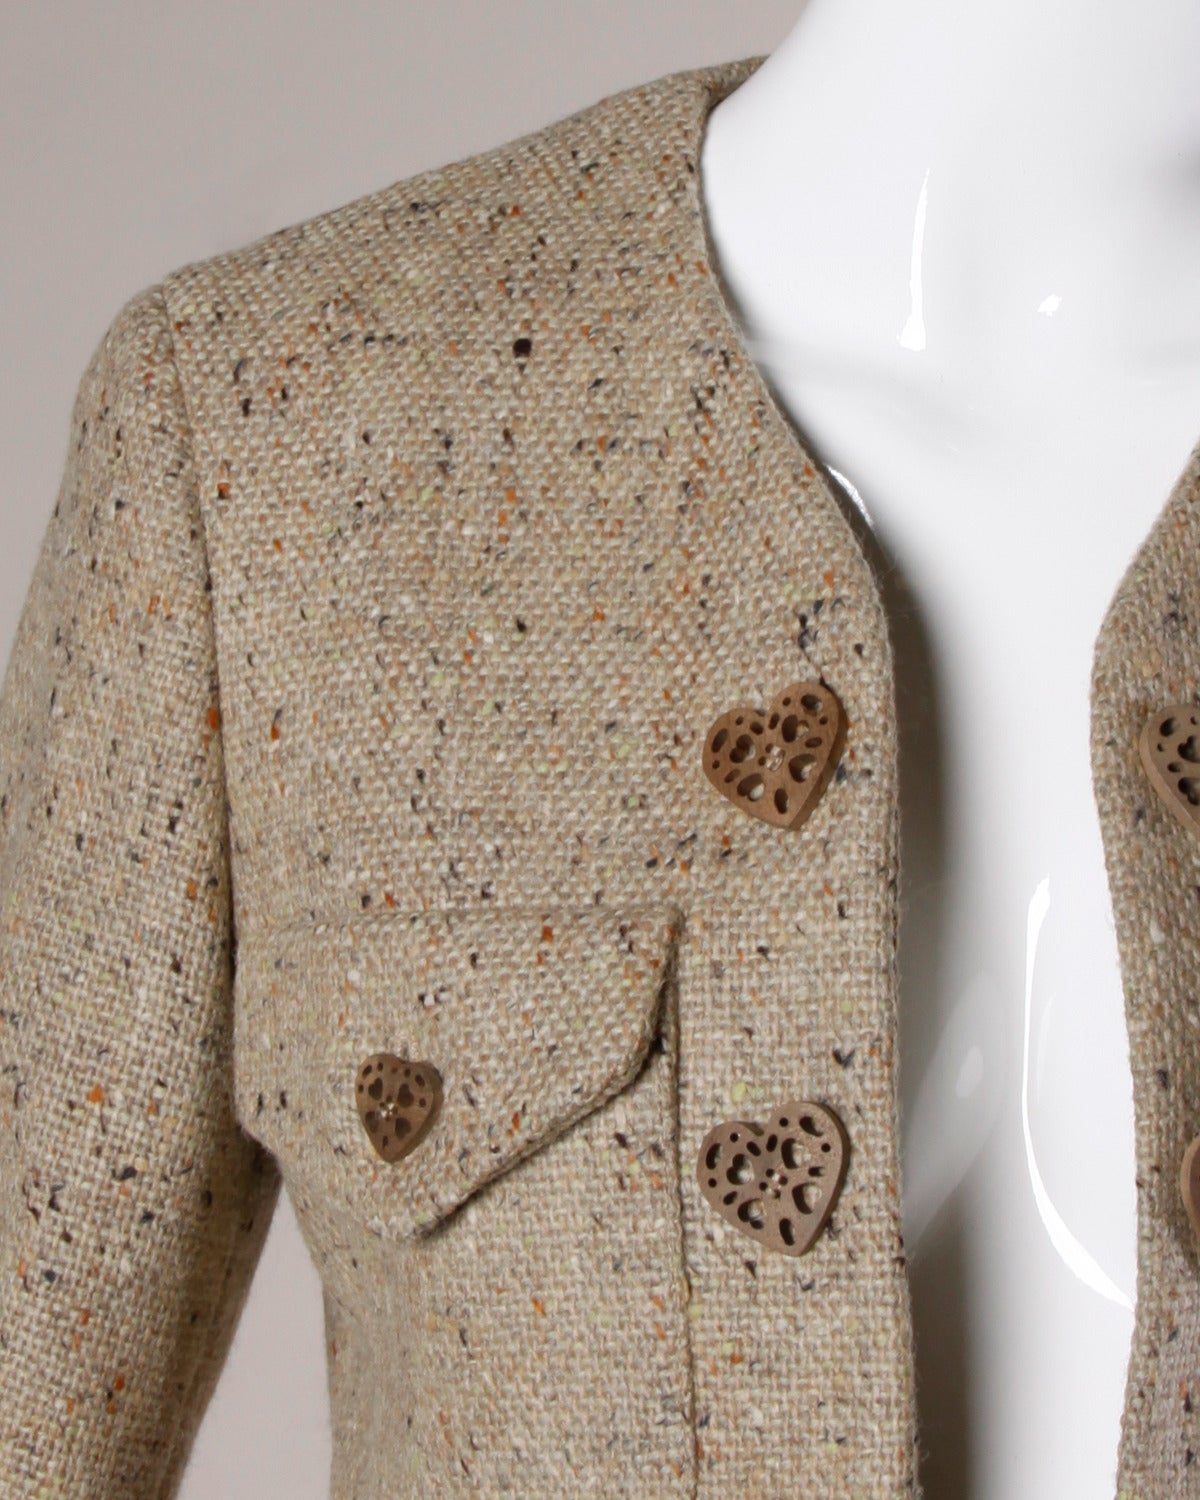 Vintage Moschino skirt suit with adorable carved wooden heart buttons. Envelope front pockets and brown wool tweed.

Details:

Fully Lined
Front Pockets
Shoulder Pads Are Sewn Into Lining
Front Button Closure On Skirt/ No Closure On